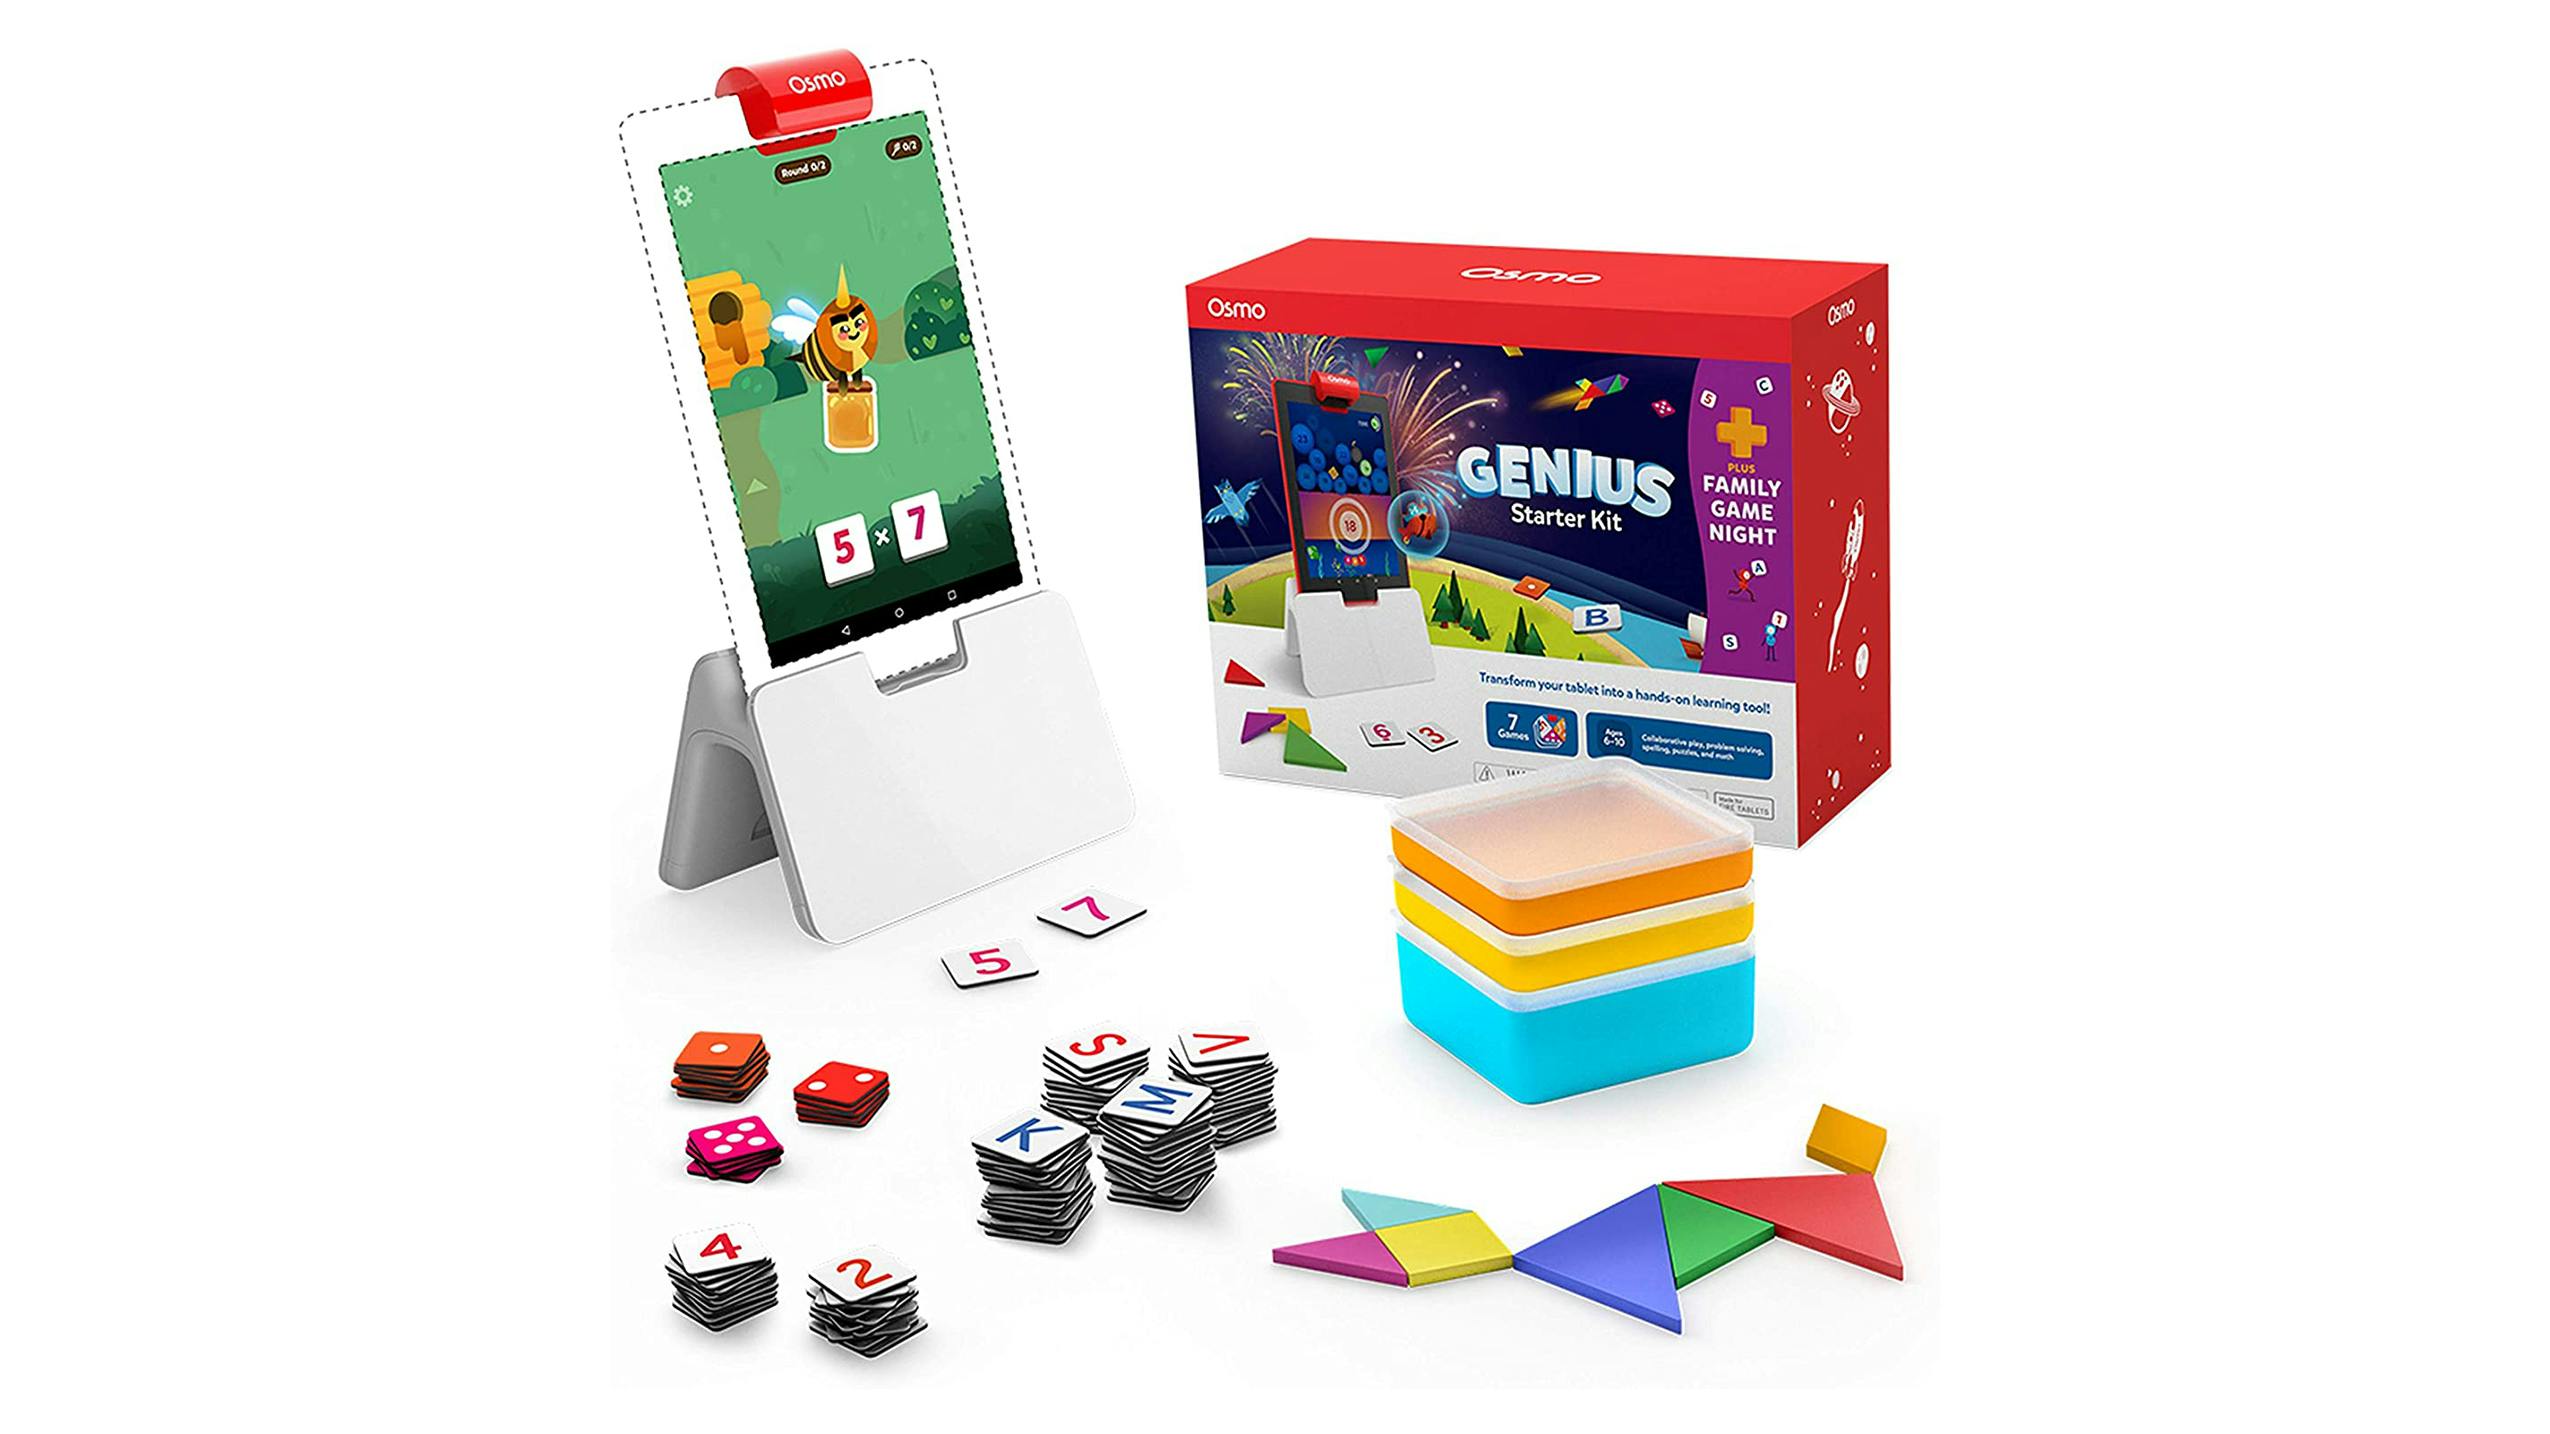 Everything that comes in the Osmo Genius Starter Kit aside from the companion tablet.